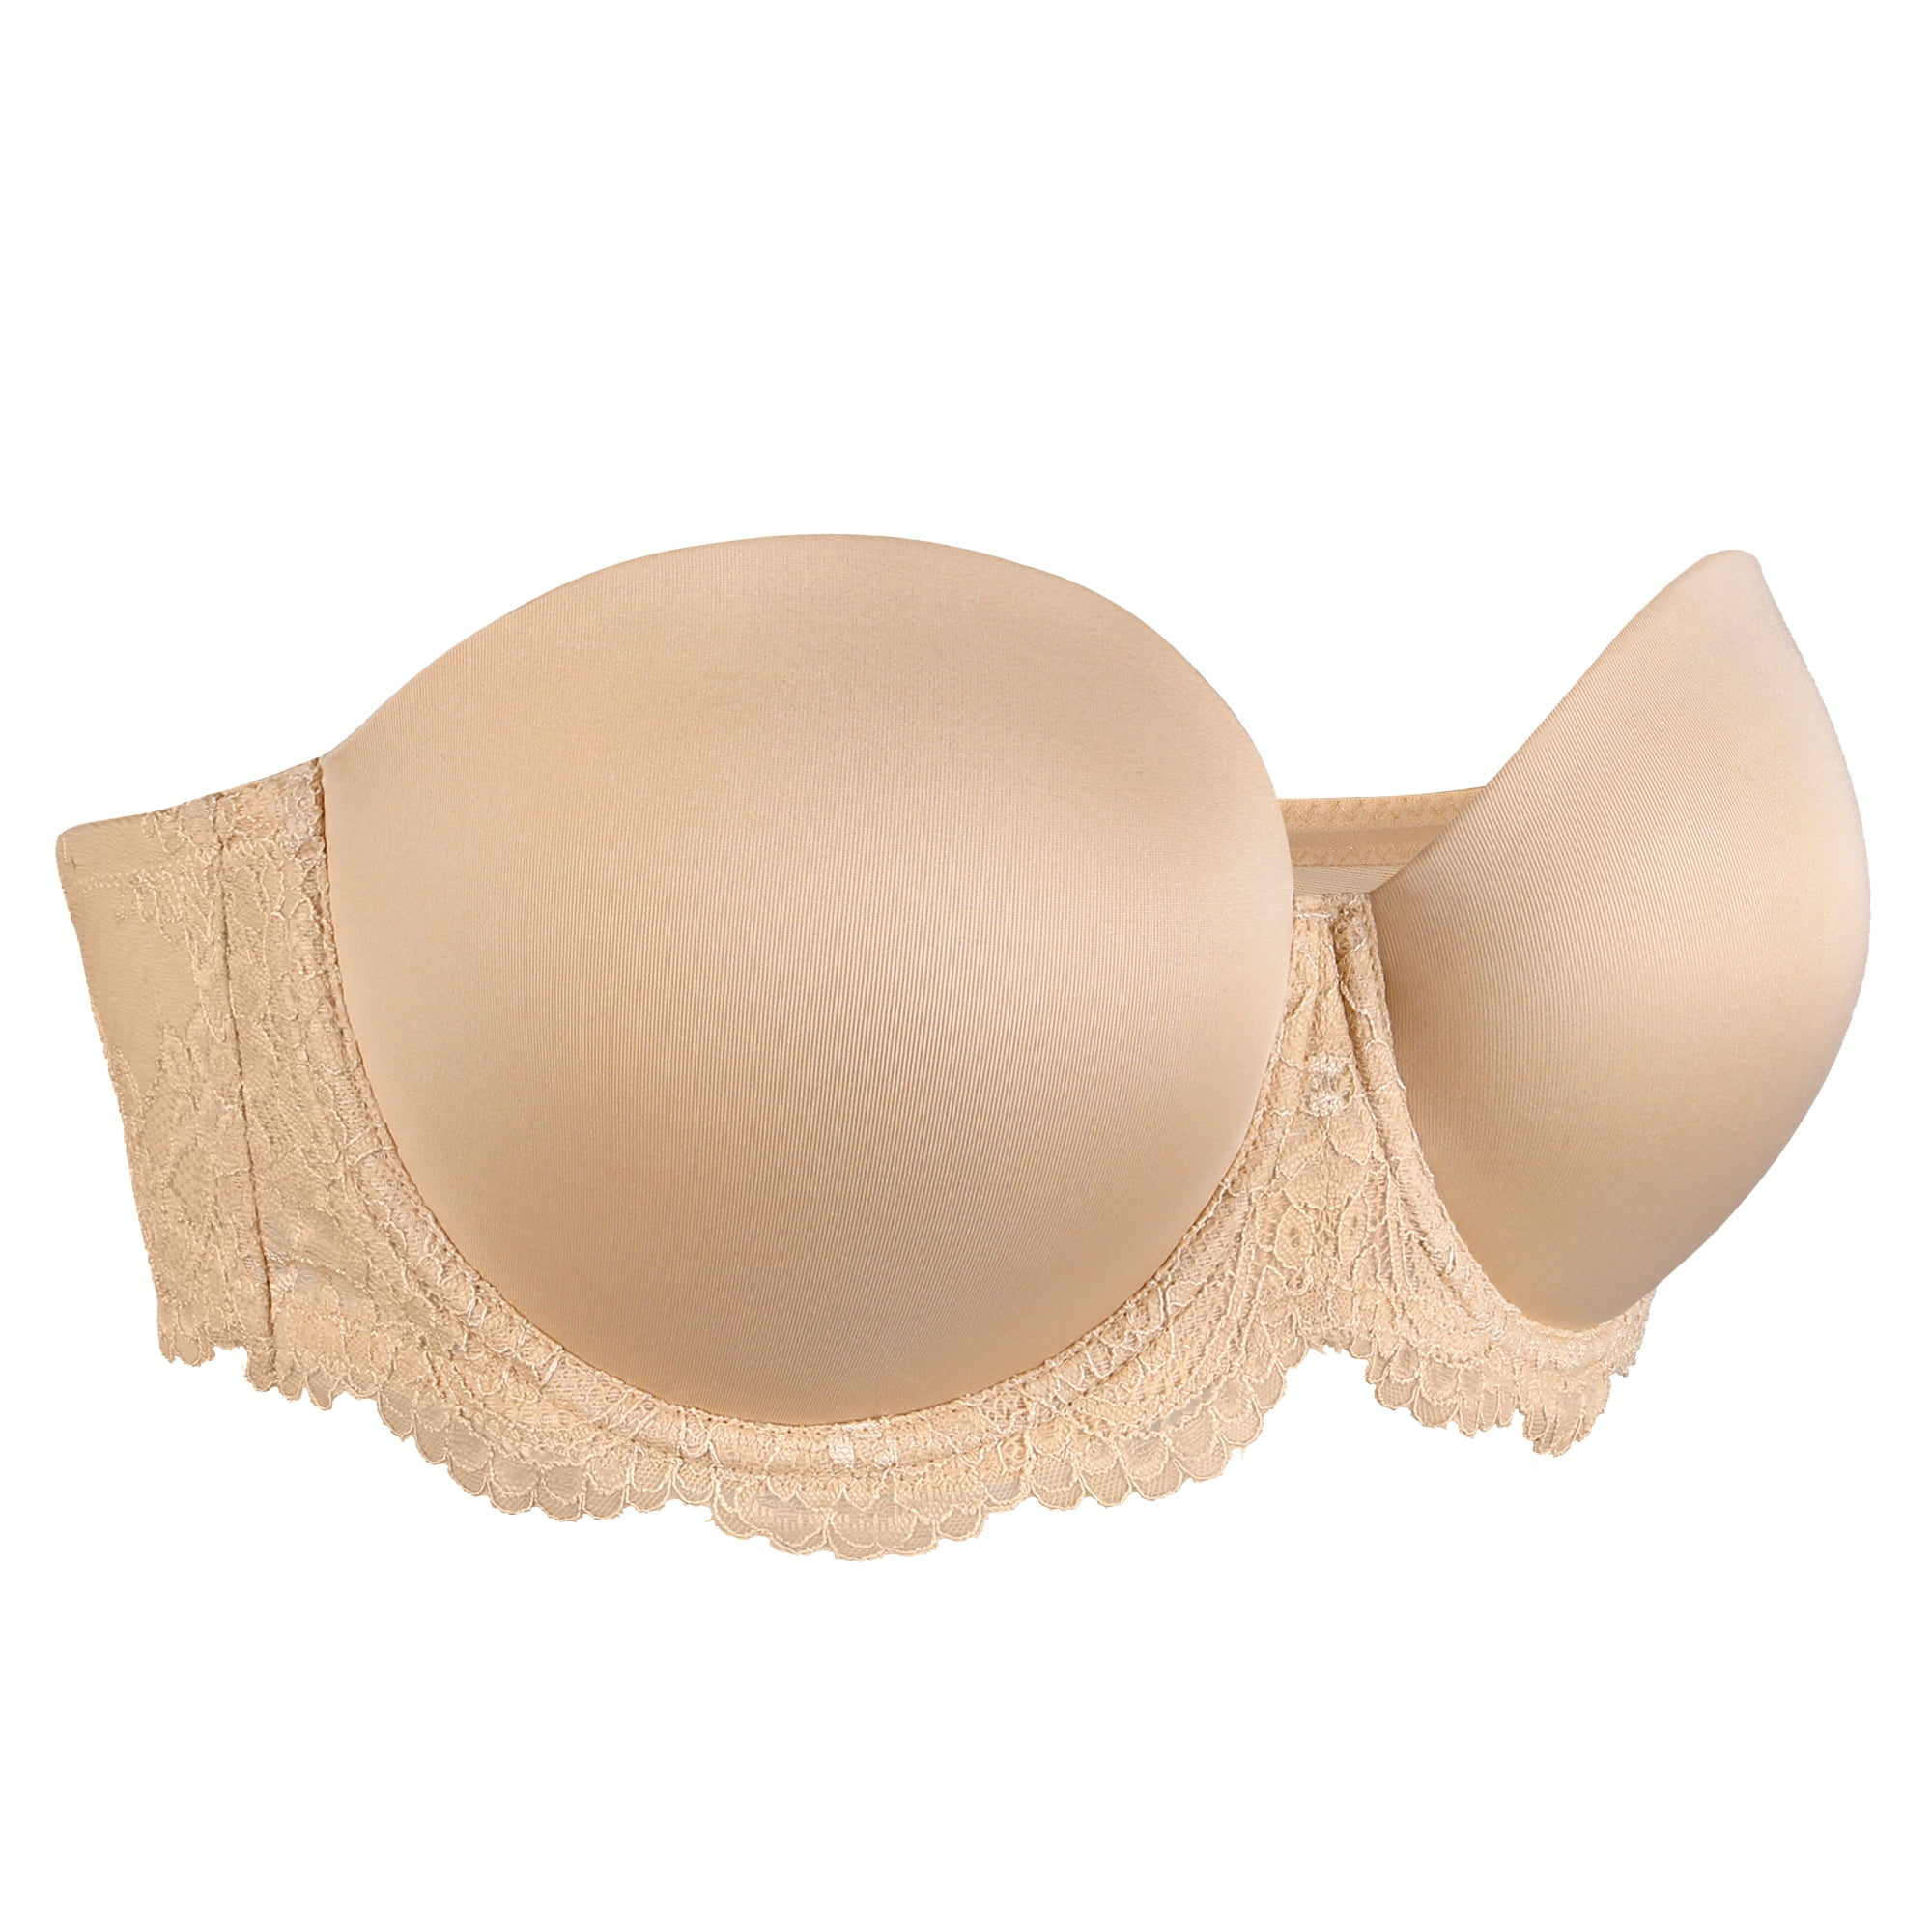 36D 36 D CROWNETTE NUDE BEIGE 5 WAY BRA UNDERWIRE SEAMLESS CUPS SLIMS  supports !